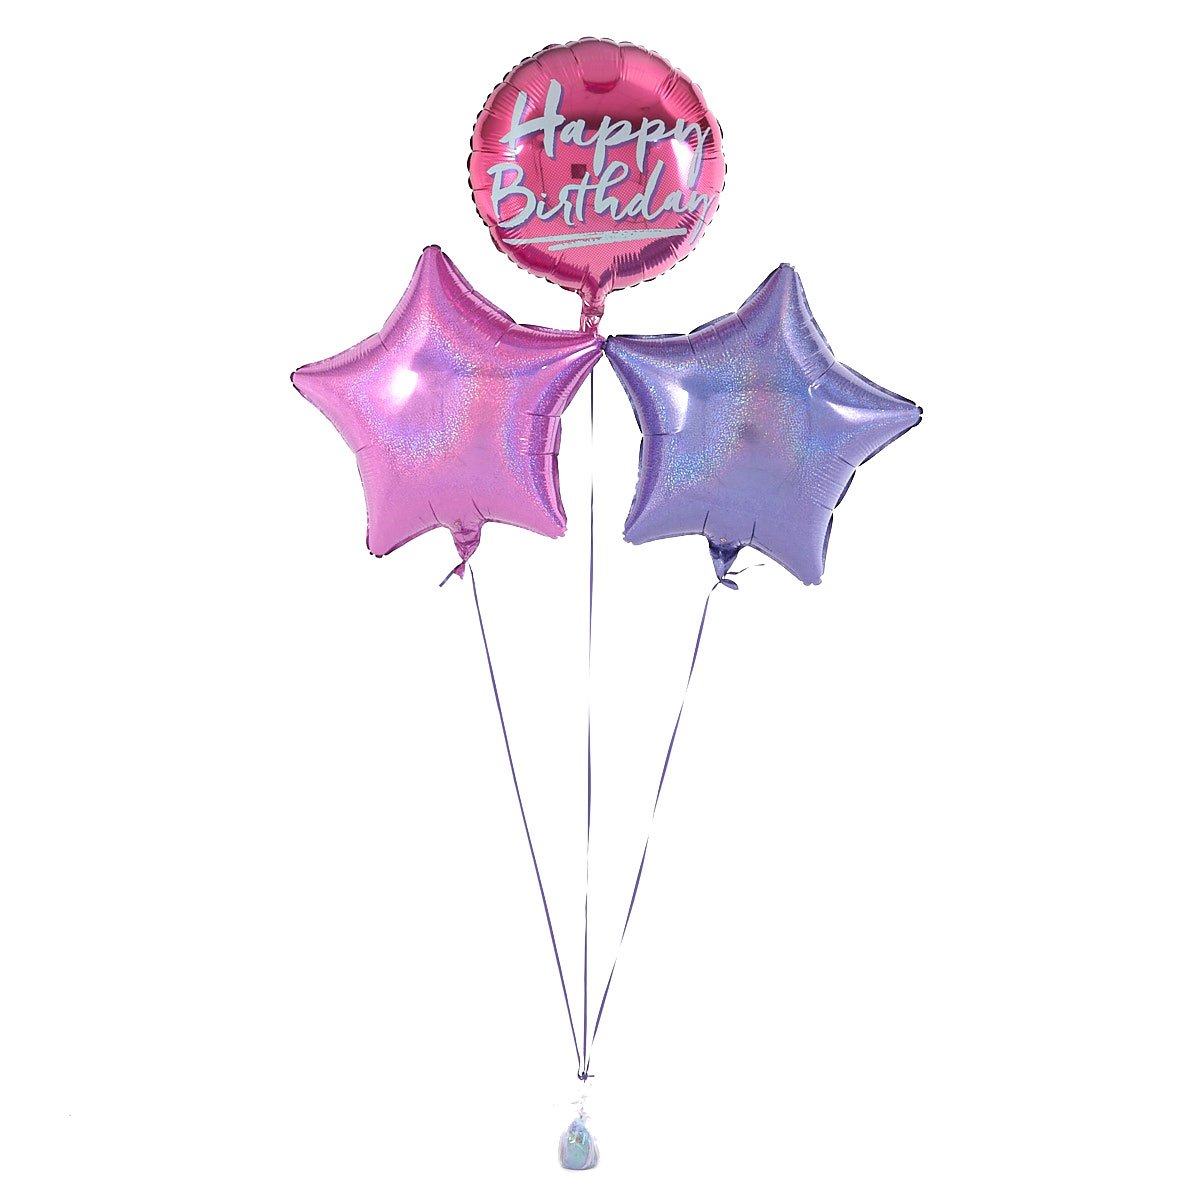 Happy Birthday Pink Balloon Bouquet - DELIVERED INFLATED!